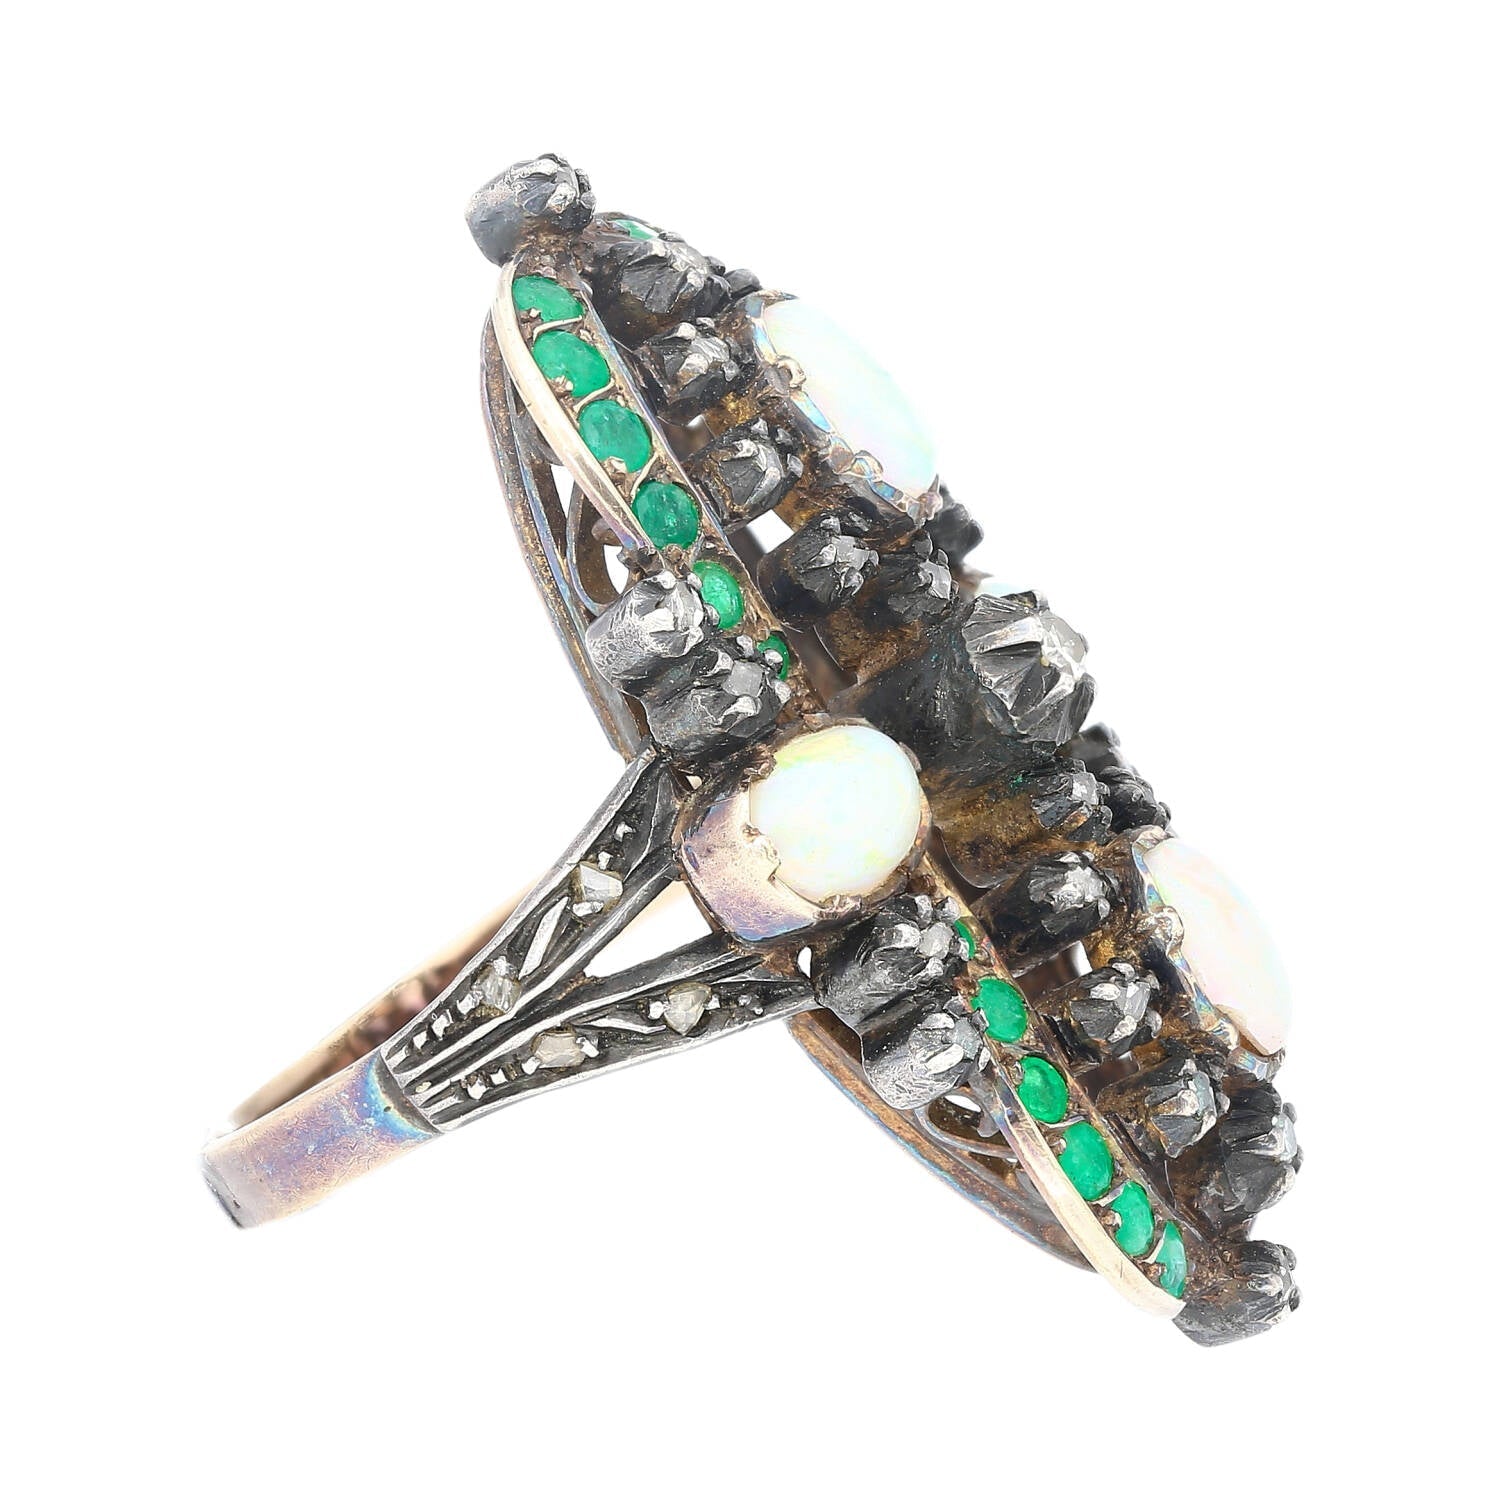 Antique Victorian Era 1800s Opal, Emerald, and Diamond Ring in Gold and Silver